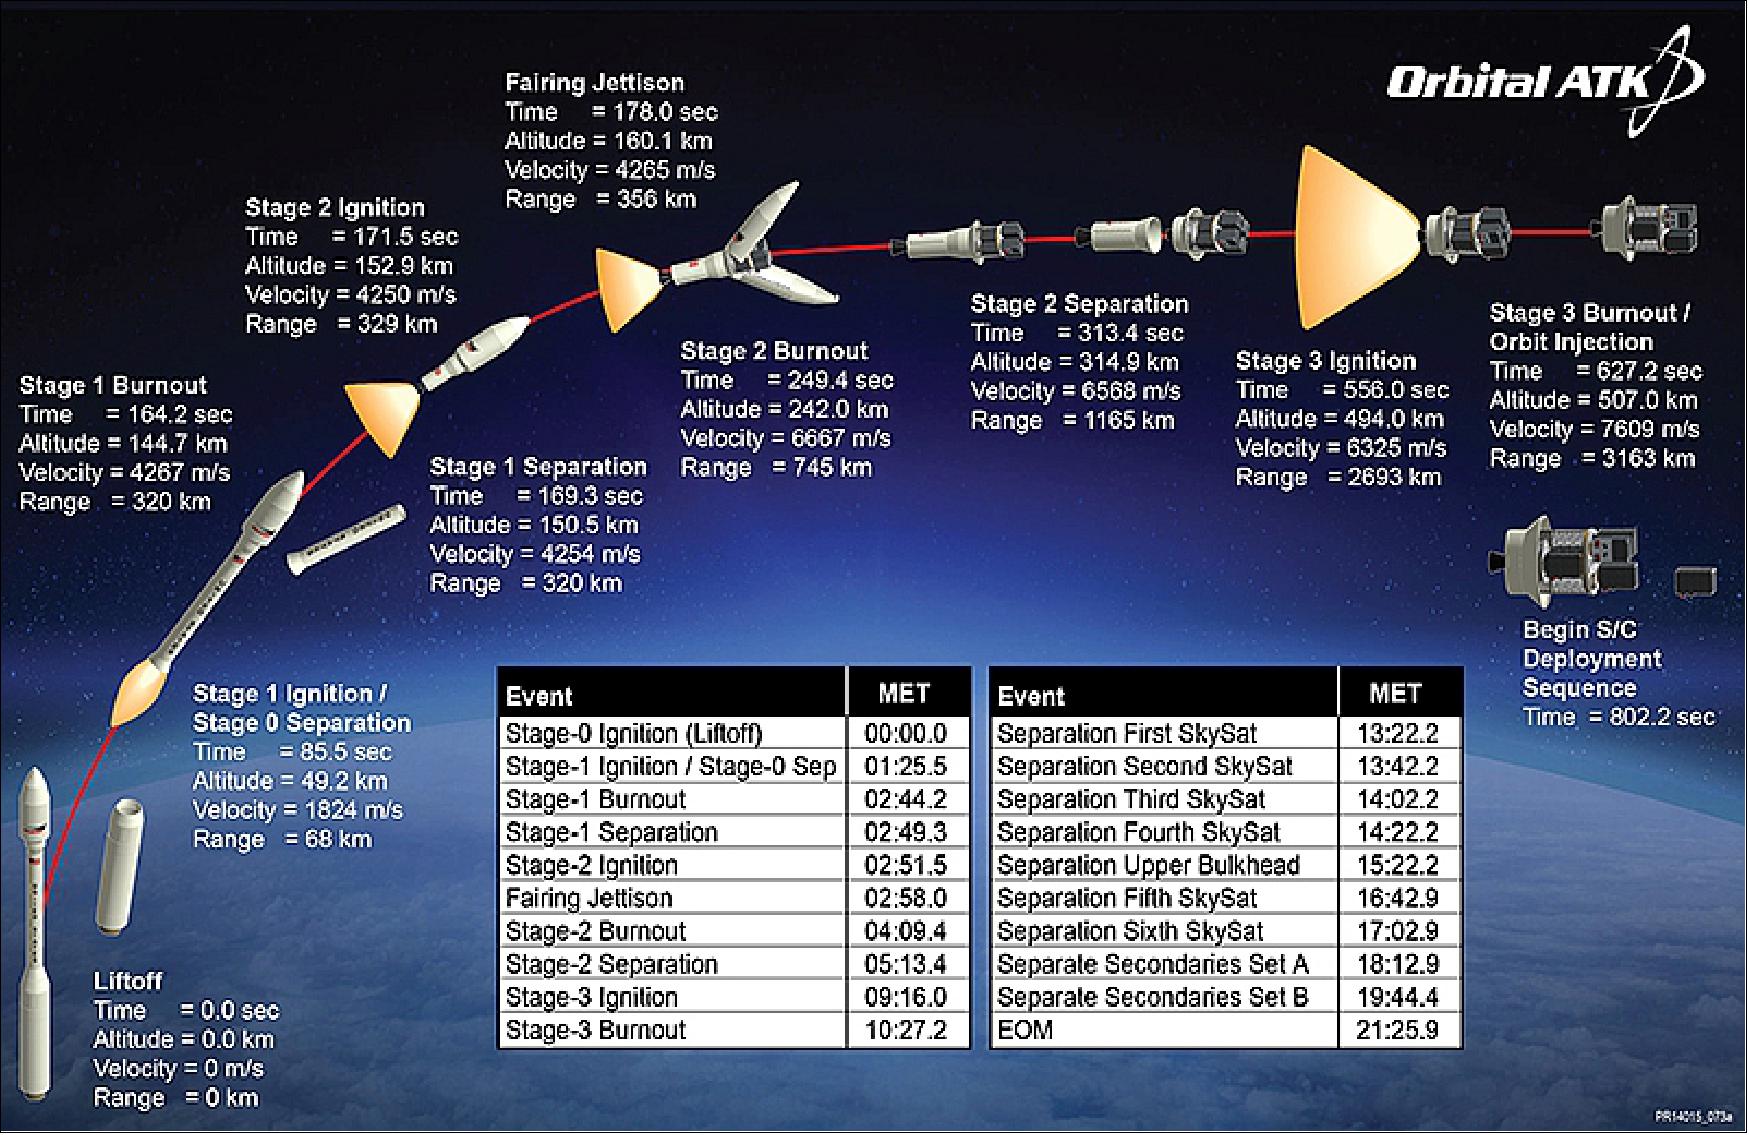 Figure 4: Illustration of the launch sequence (image credit: Orbital ATK) 13)